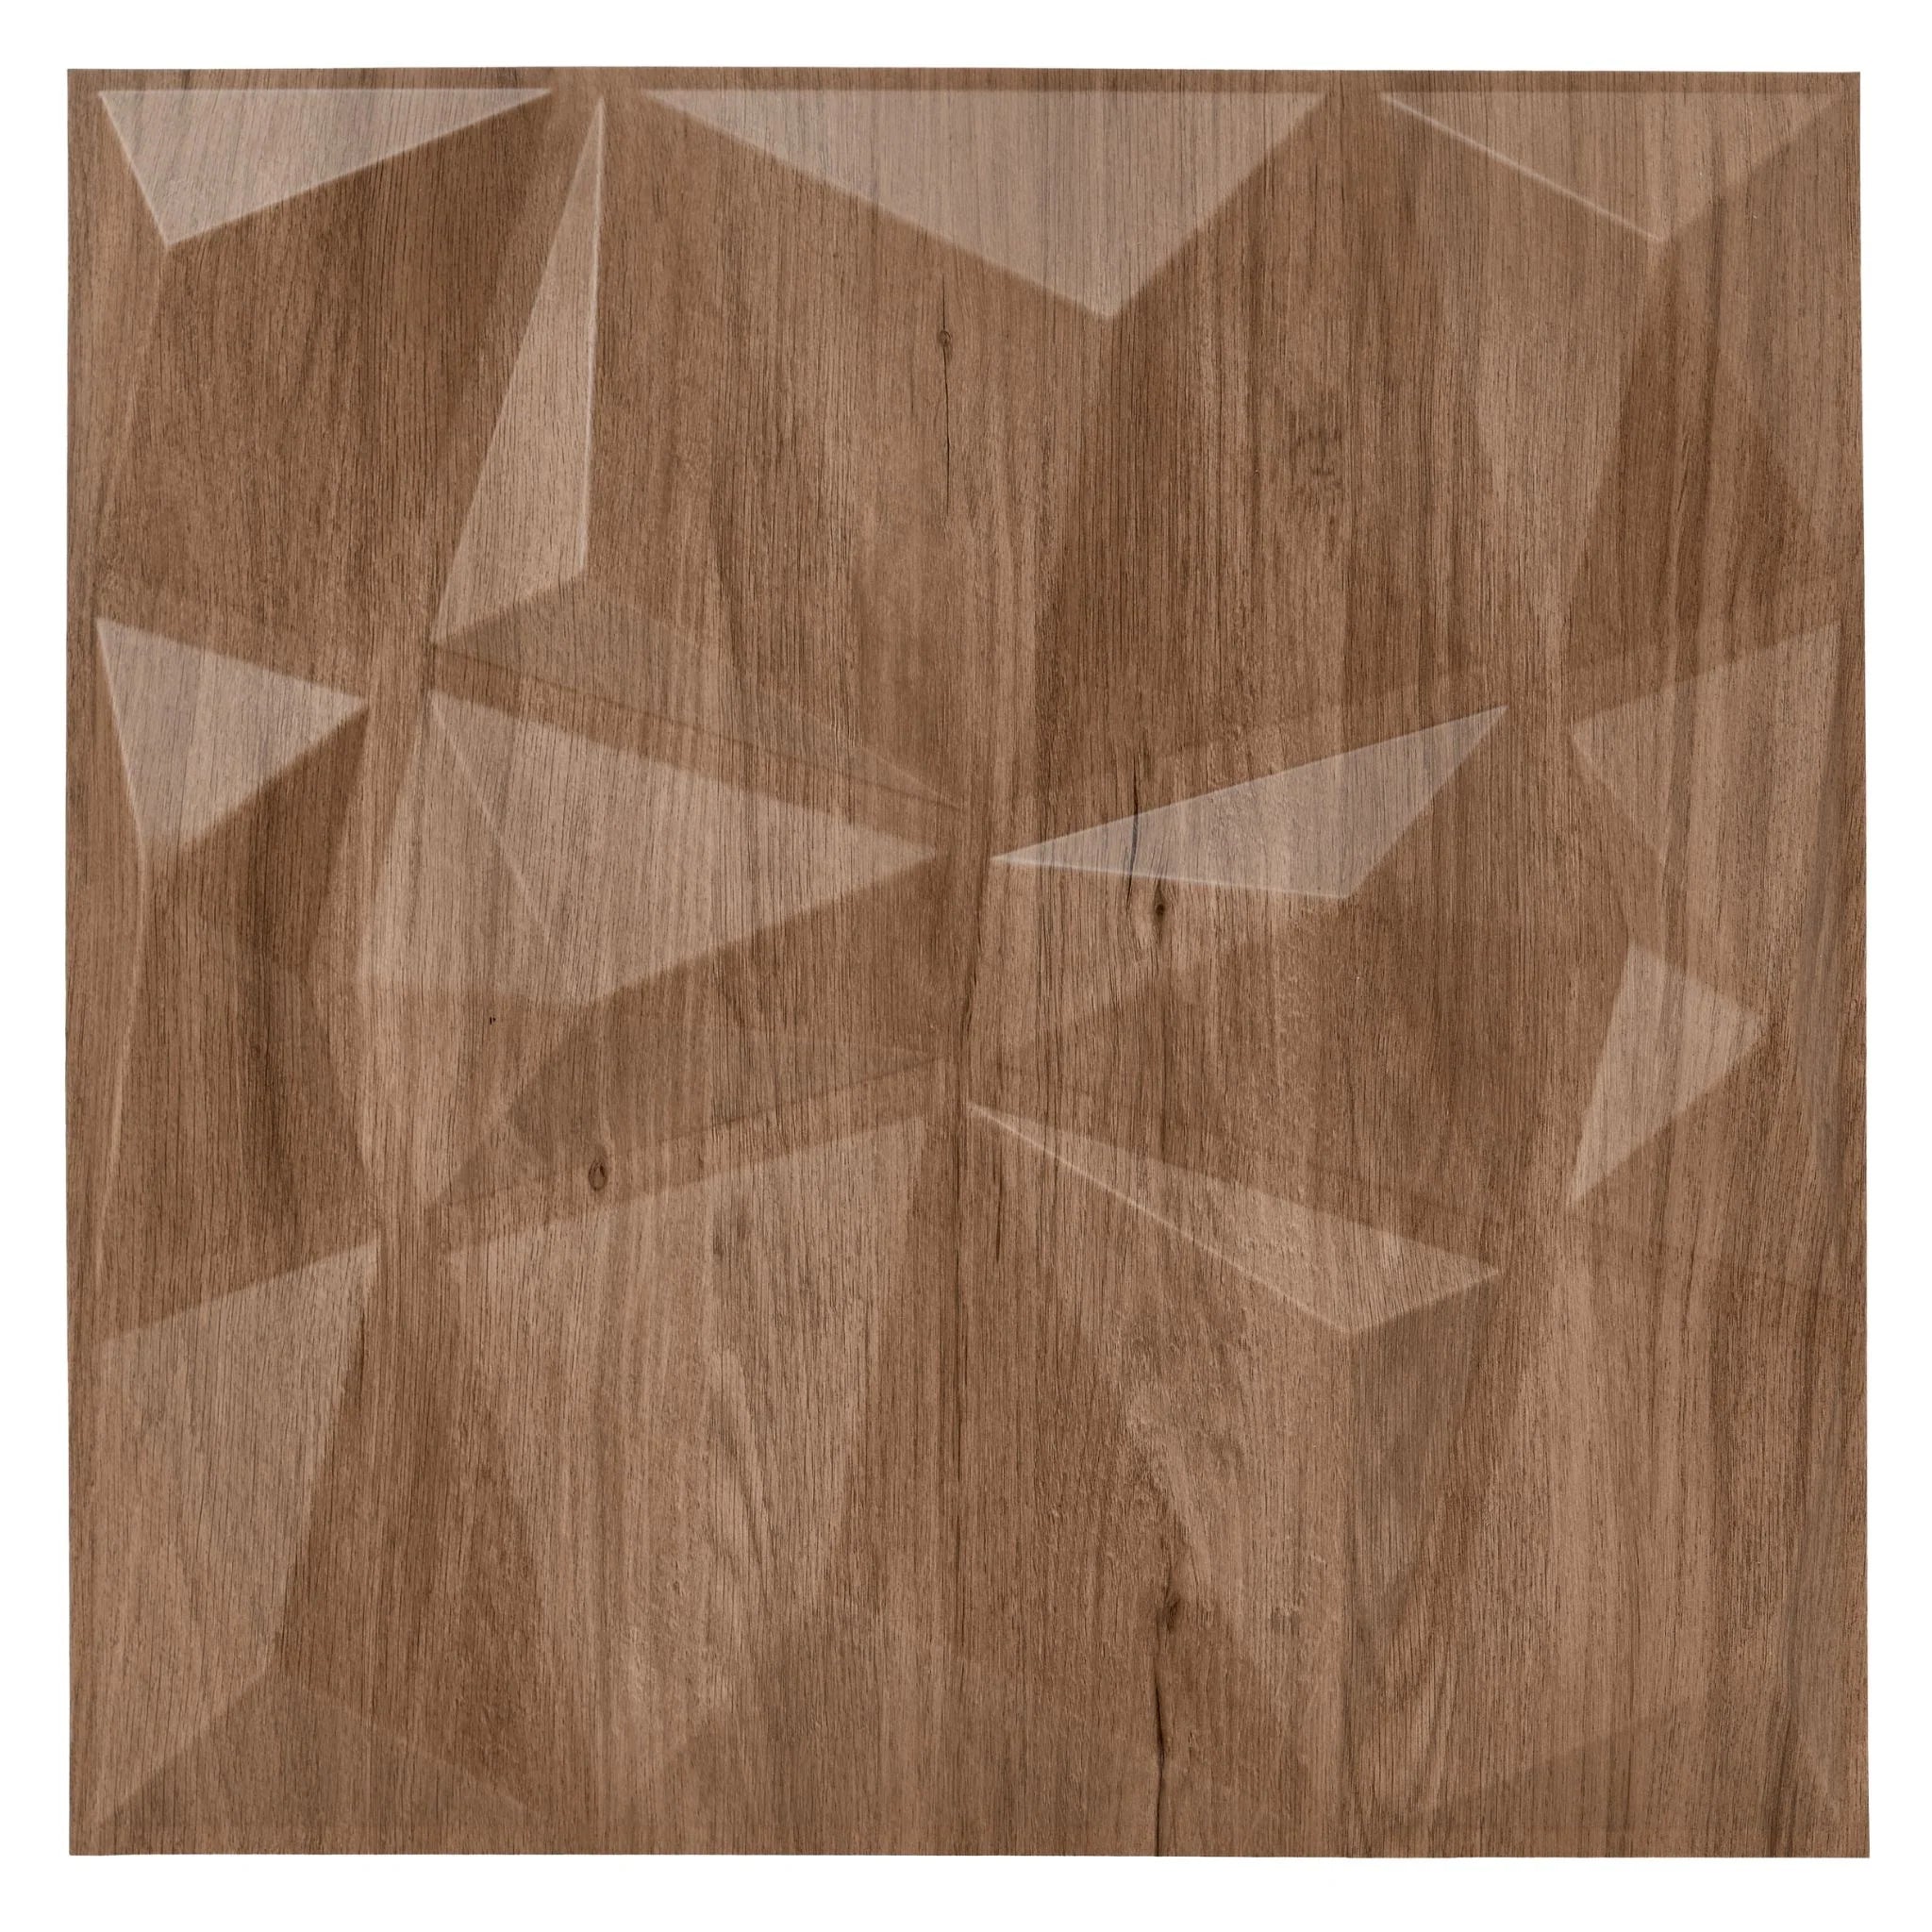 Wooden PVC wall panel with geometric design, 50x50 cm size